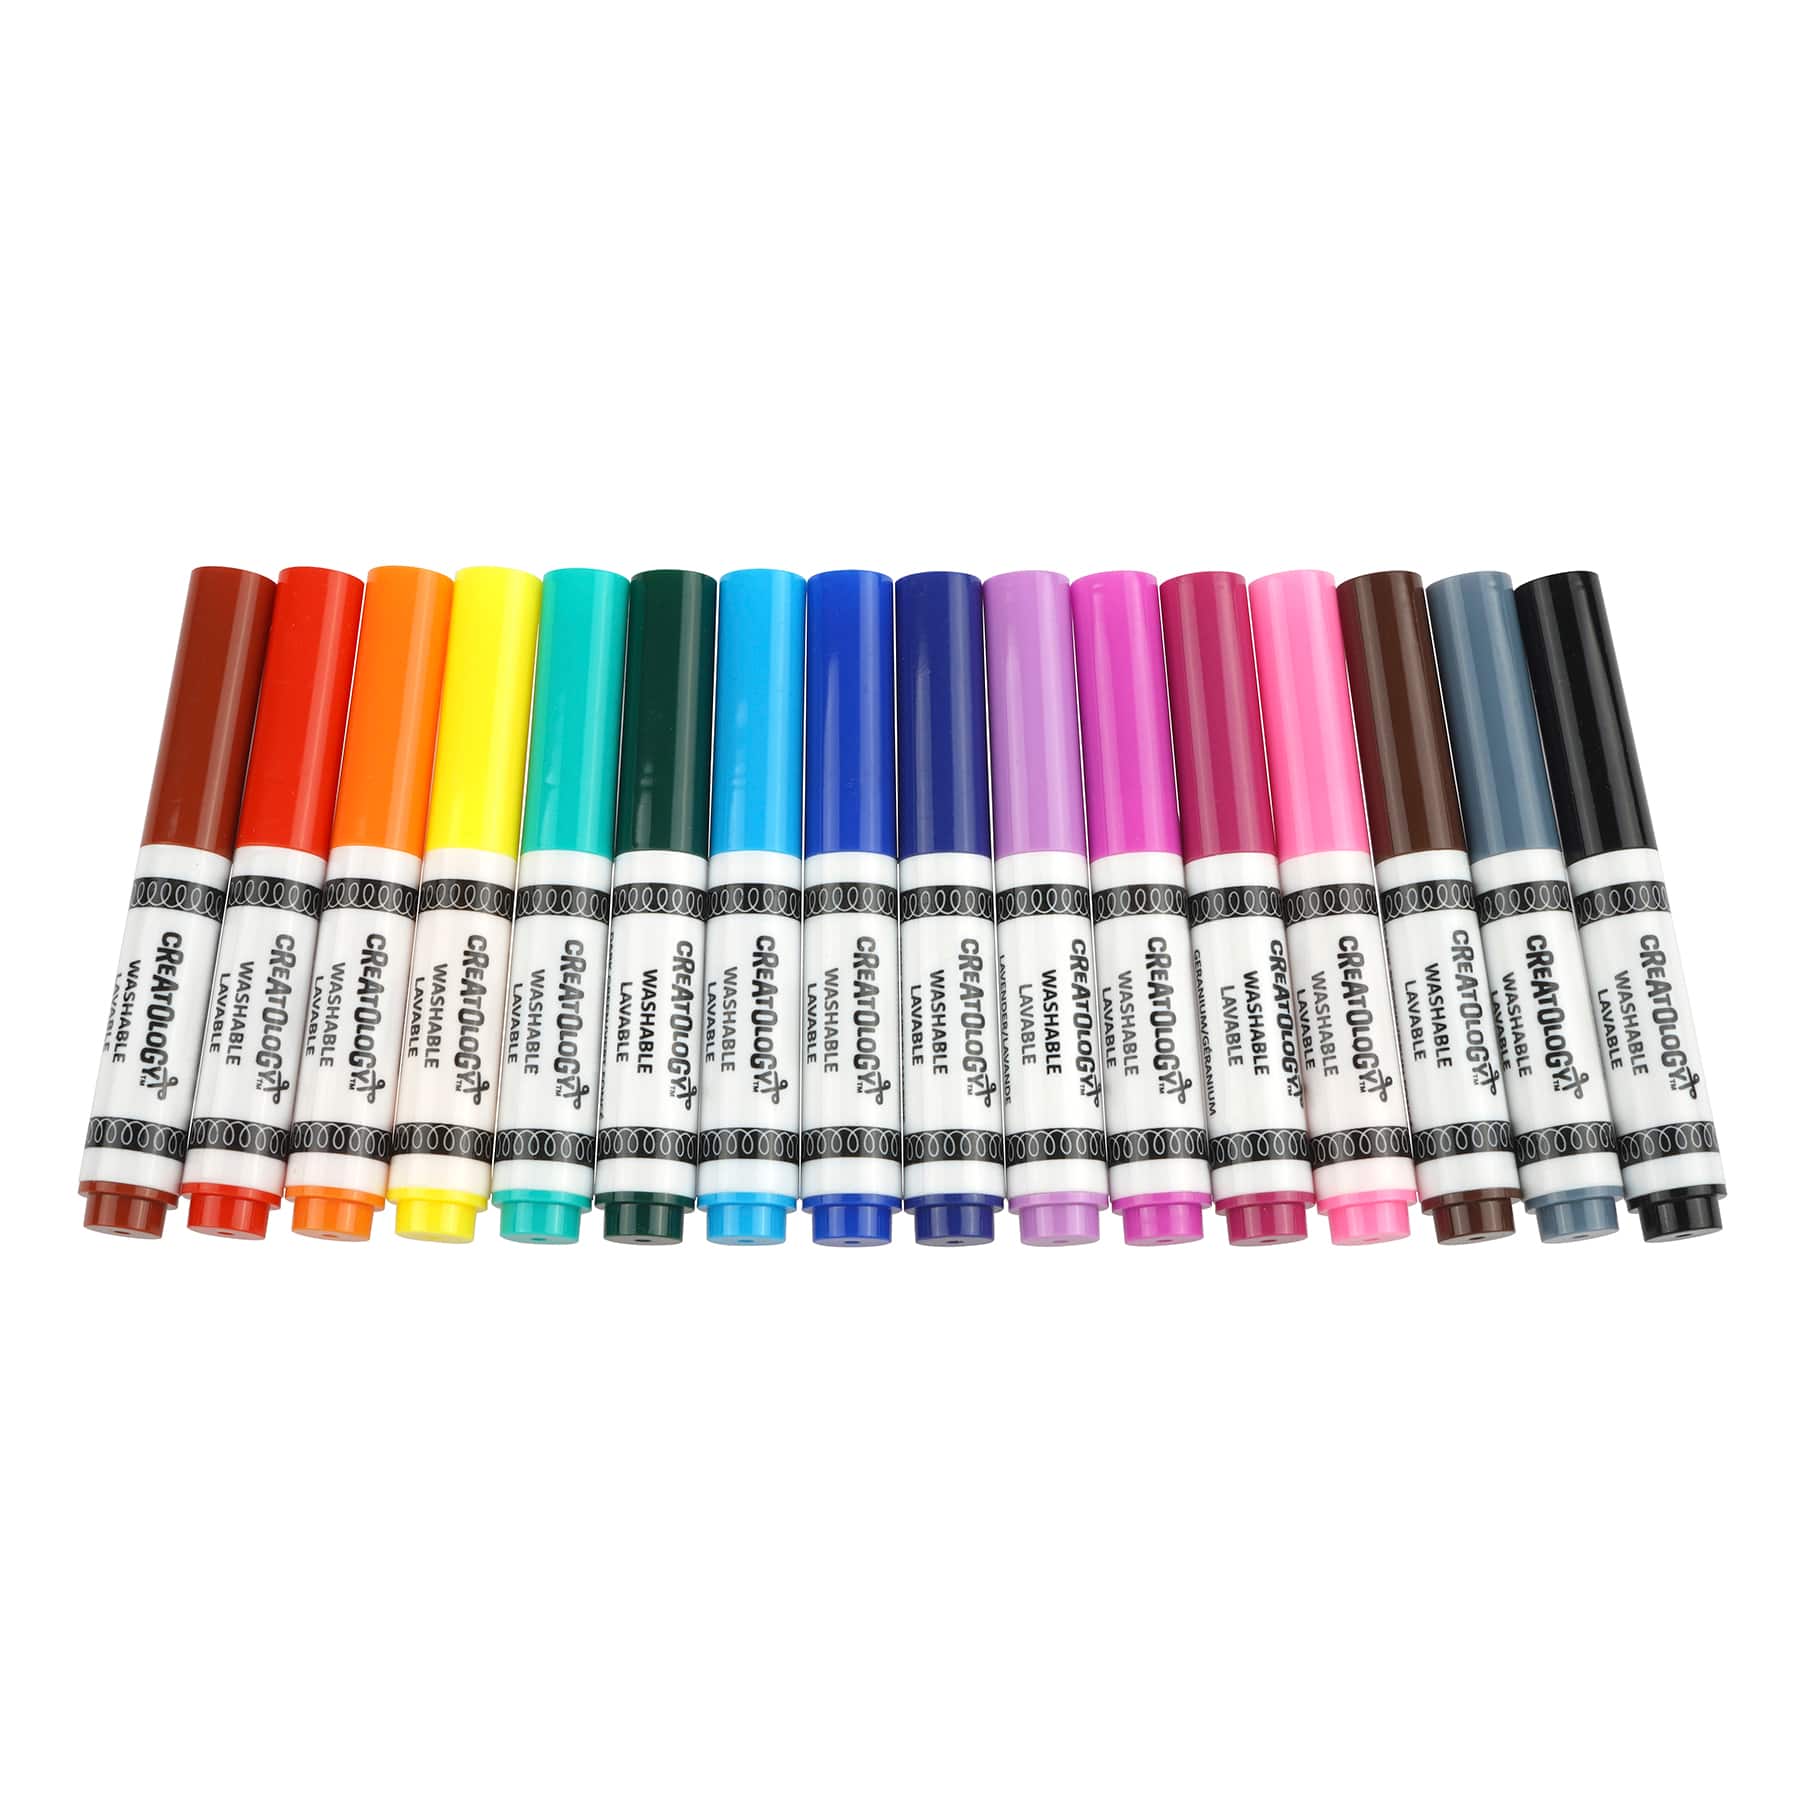 Michaels Bulk 12 Packs: 20 Ct. (240 total) Round Tip Washable Marker Set by Creatology, Size: 6.3 x 0.47 x 9.64, Assorted